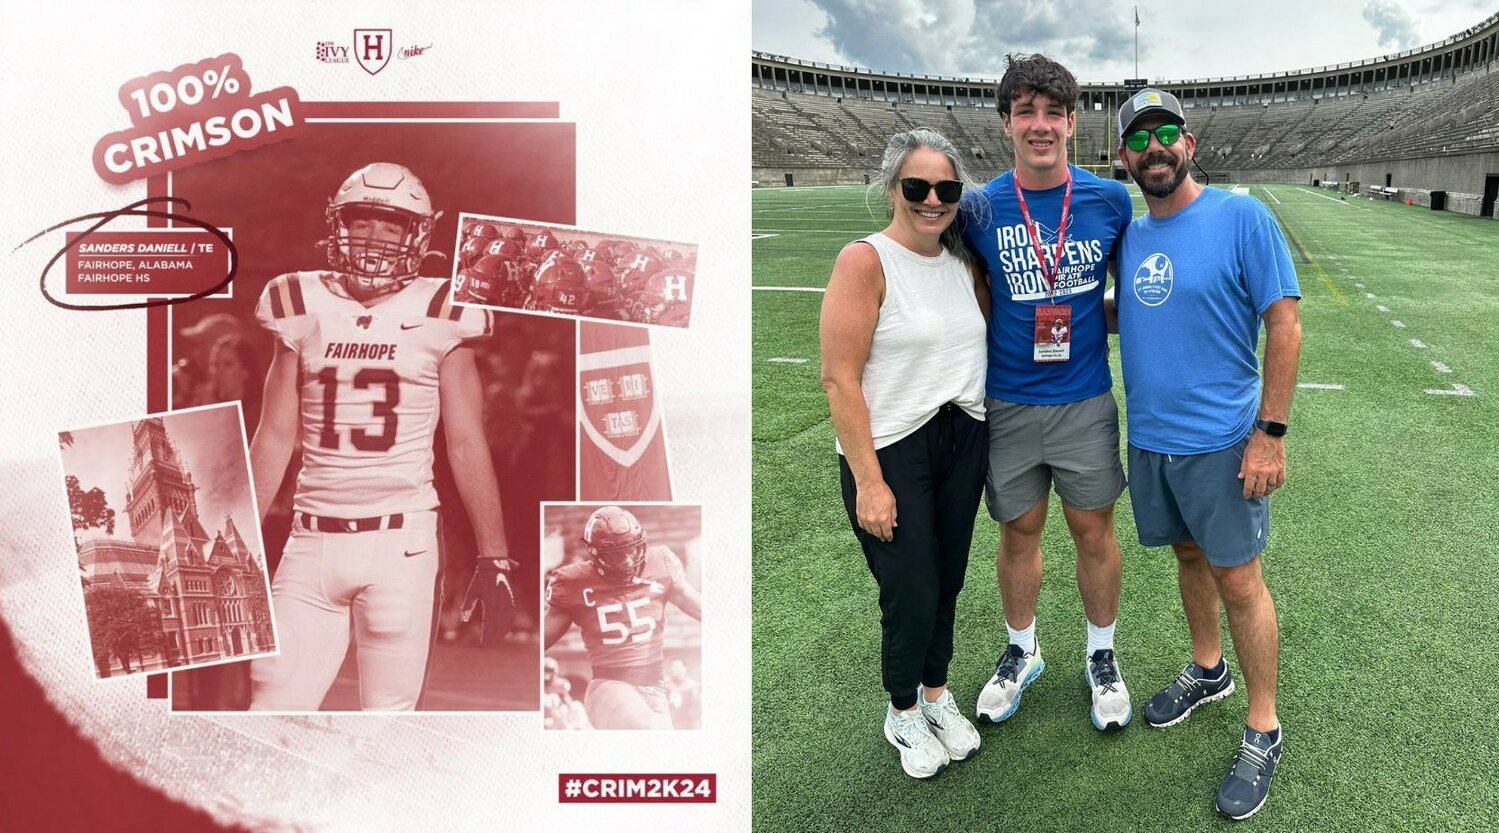 Fairhope rising senior Sanders Daniell announced his commitment to the Harvard Crimson on Thursday, June 29. At right, he is pictured at his campus visit on Monday, June 26, before he announced his offer the following day.